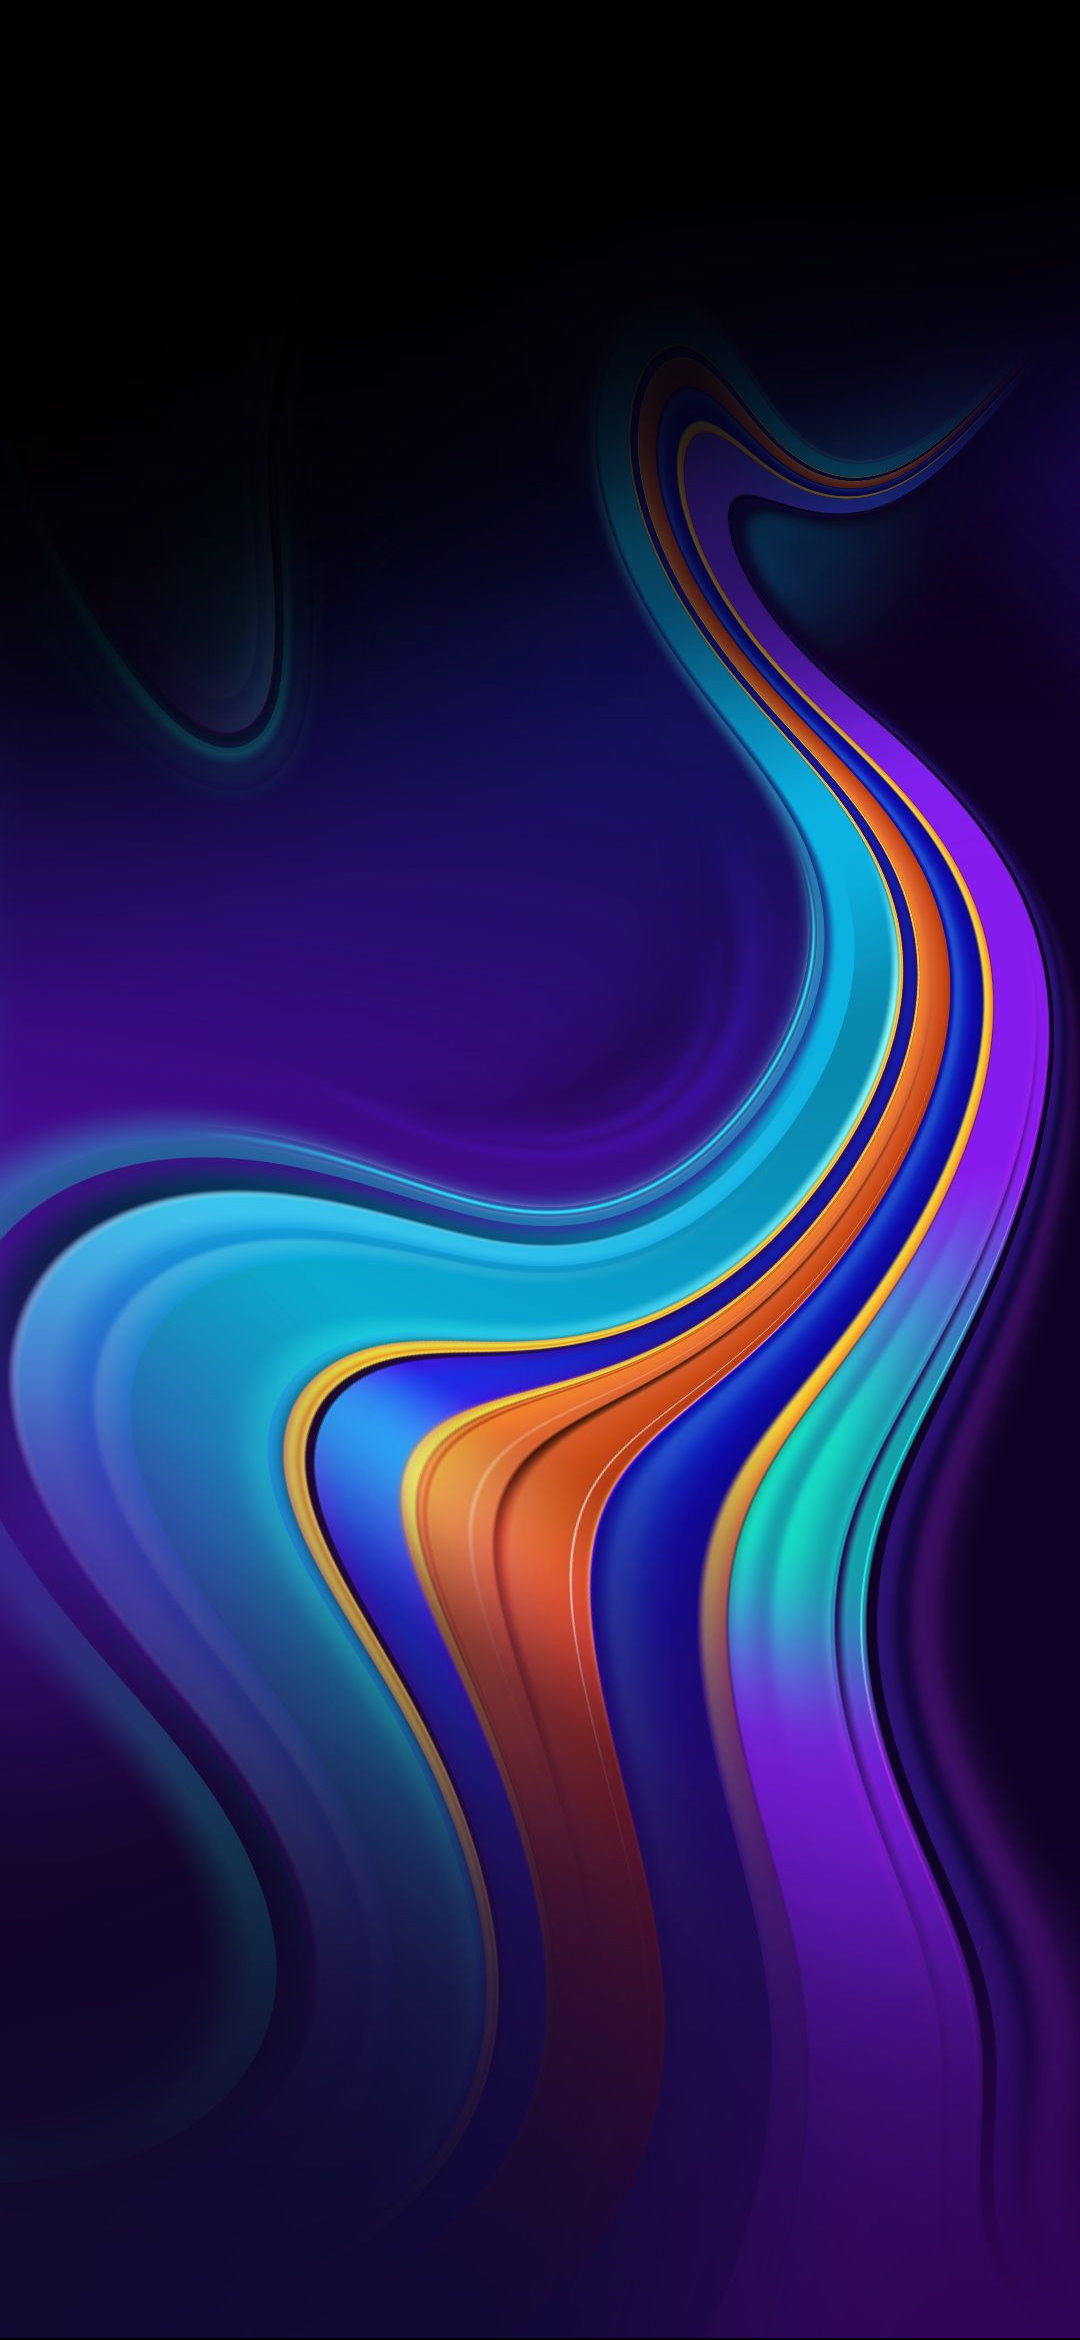  Wallpapers  Samsung  Galaxy A50  Pack 4